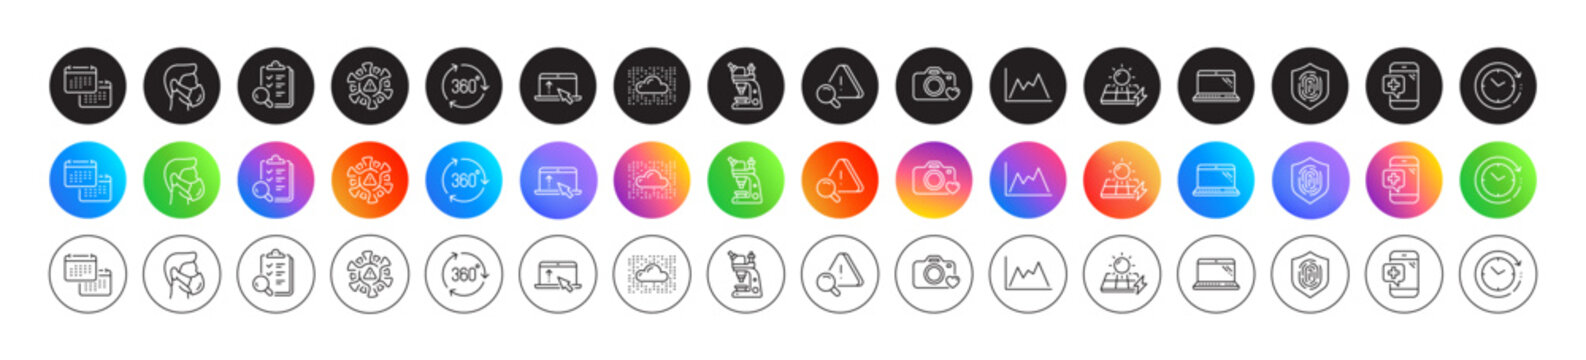 Time change, Cloud system and Medical phone line icons. Round icon gradient buttons. Pack of Microscope, Diagram, Laptop icon. Solar panels, Swipe up, Coronavirus pictogram. Vector